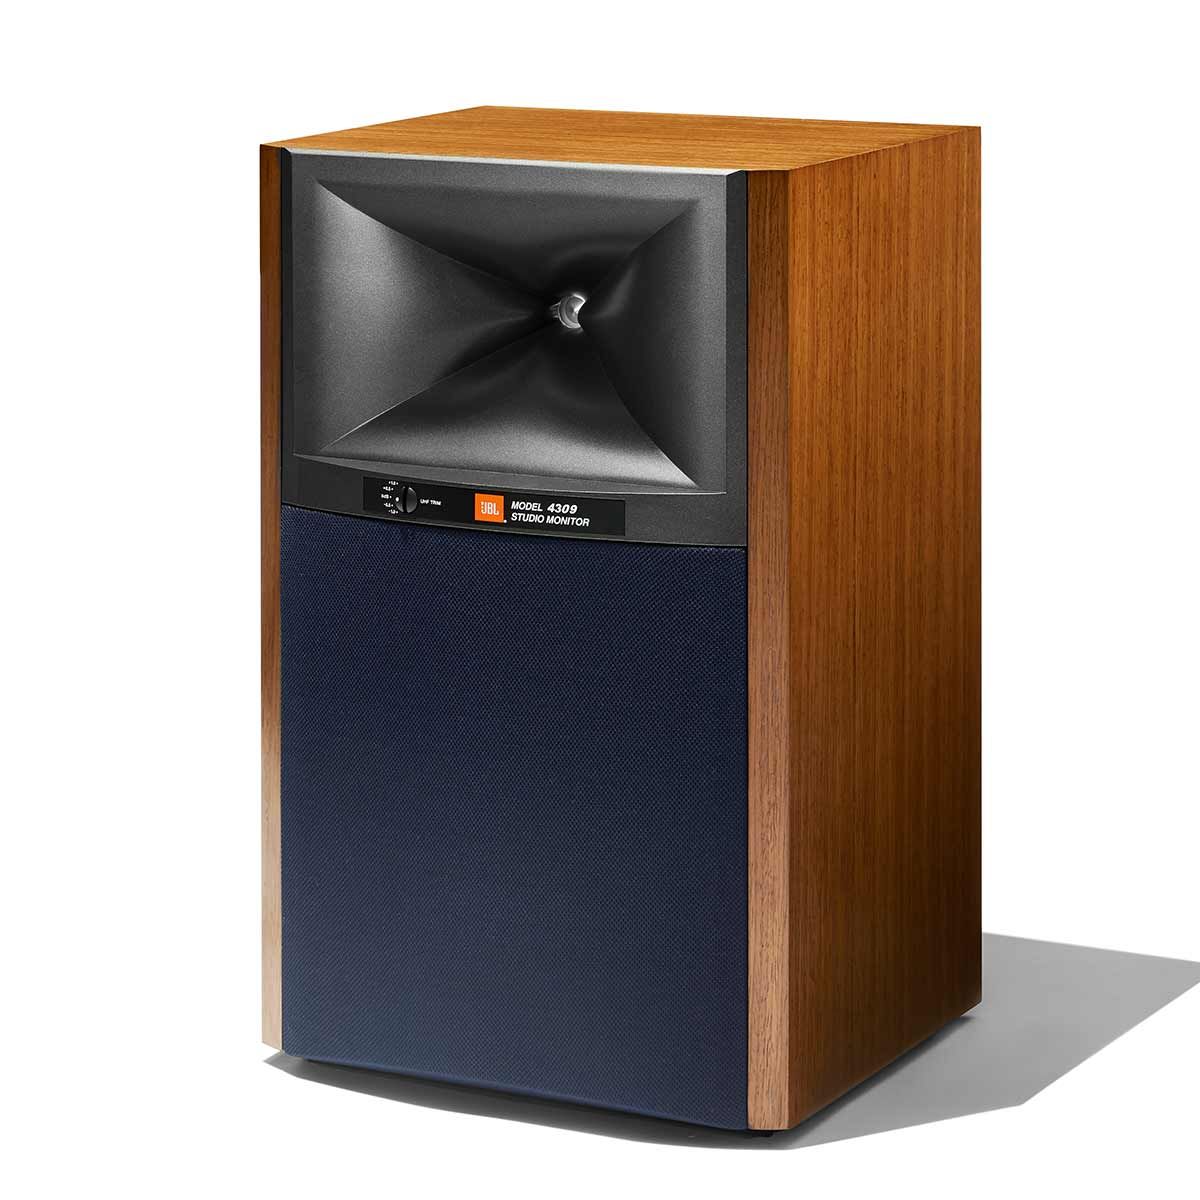 JBL Synthesis 4309 Bookshelf Speakers, Walnut, front angle view with grille